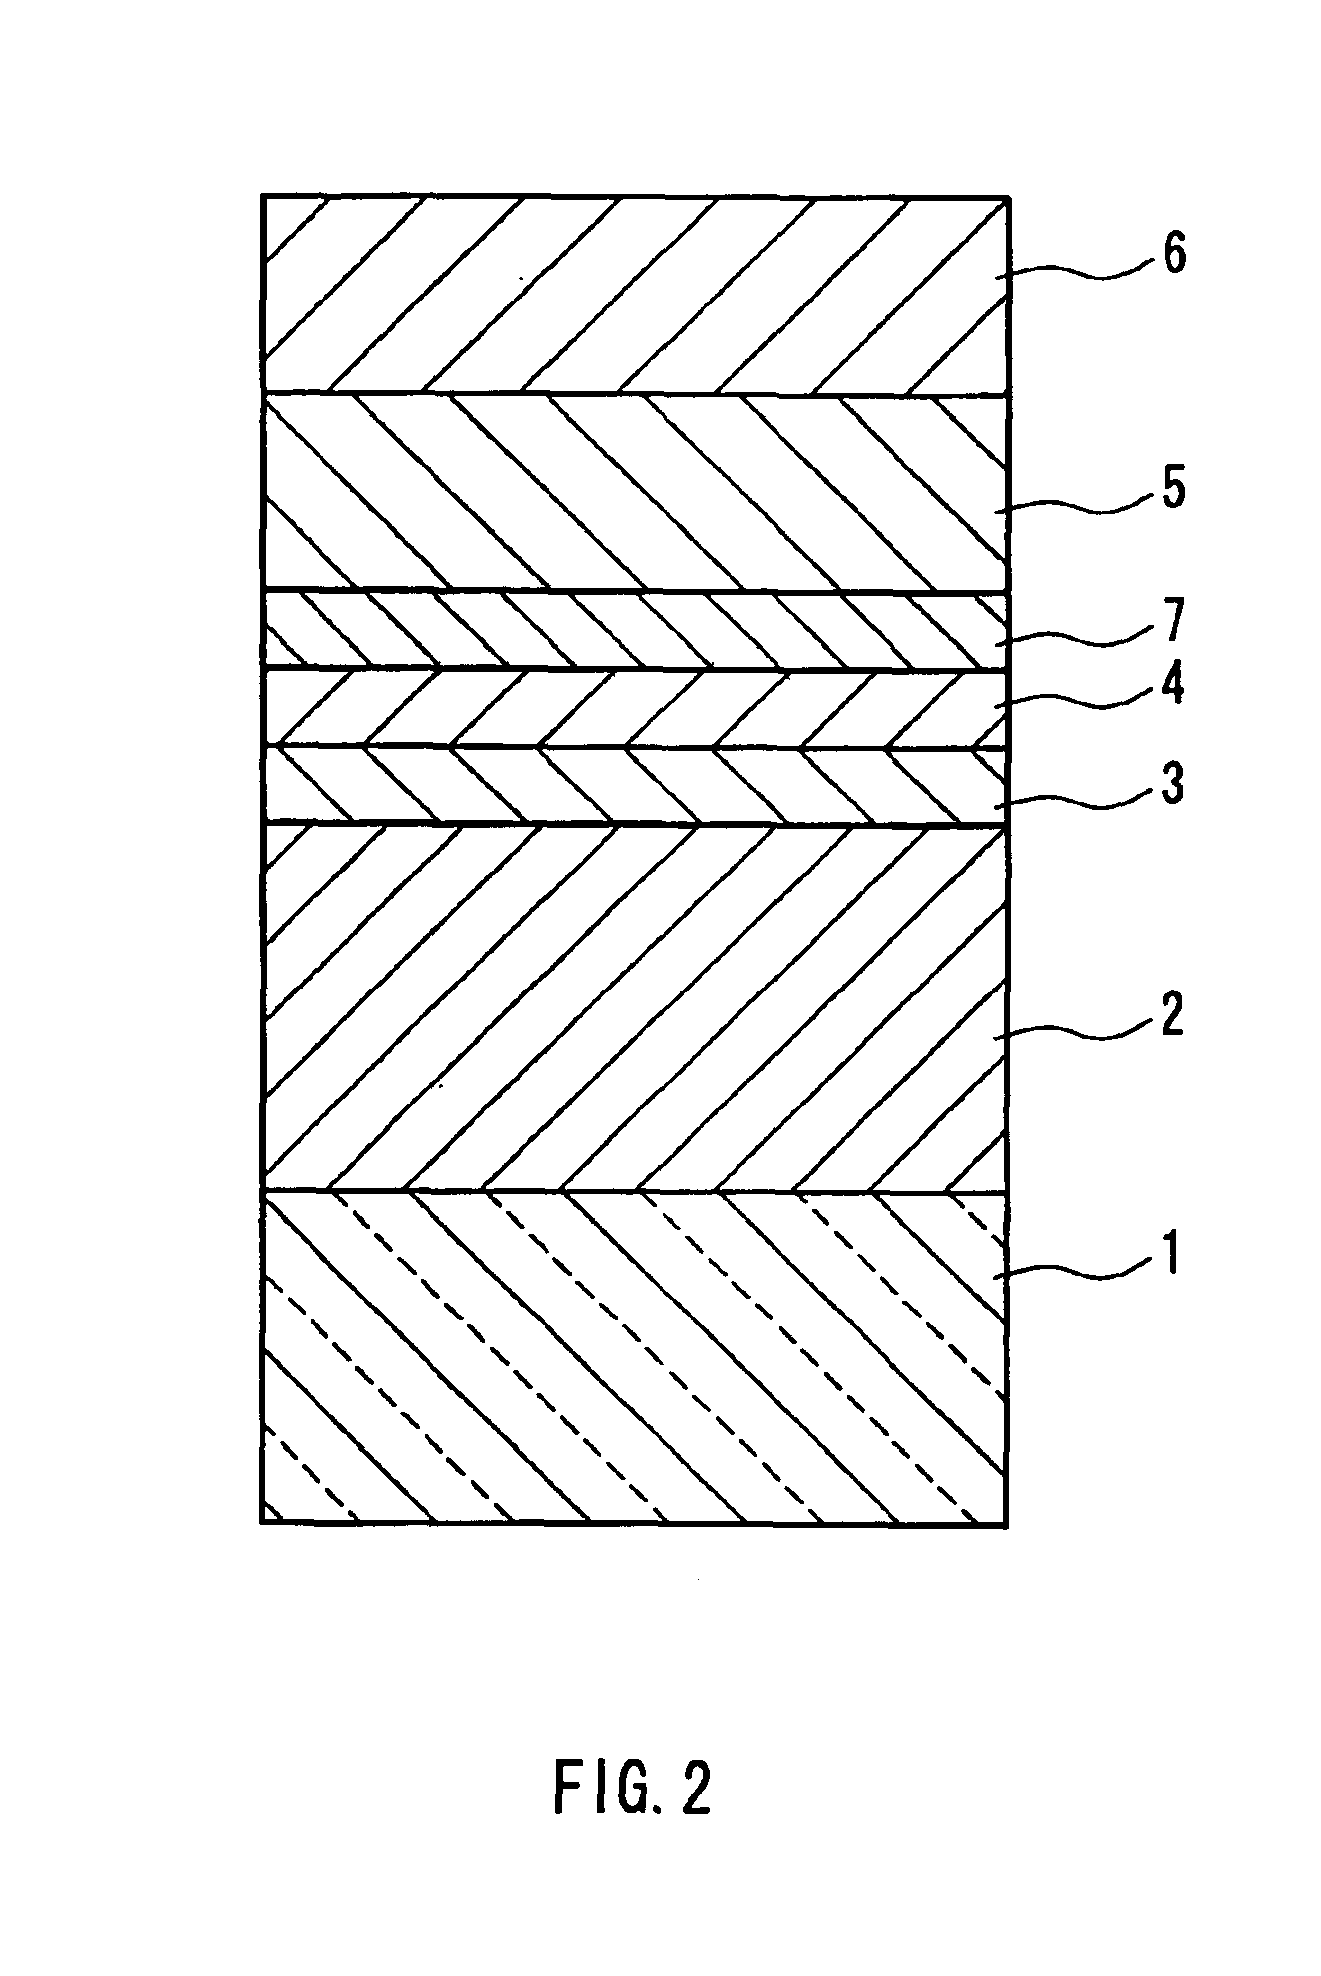 Optical information recording medium and its manufacturing method